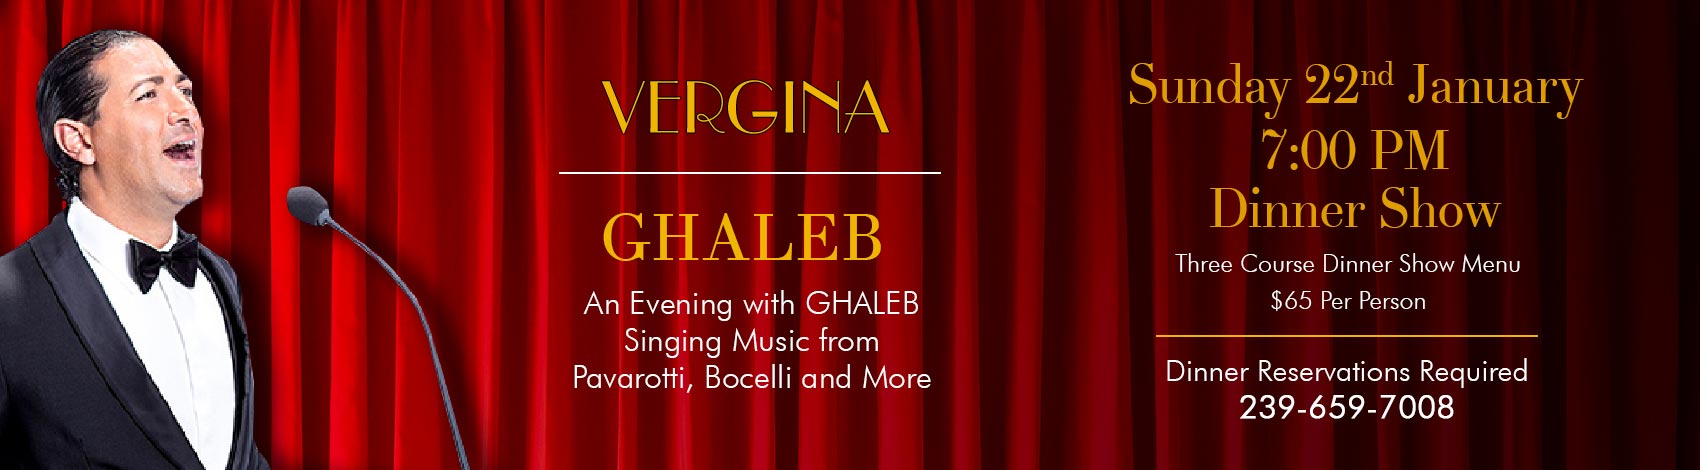 An Evening with GHALEB Singing Music from Pavarotti, Bocelli and More Jauaray 22nd 7:00 PM Dinner Show Three Course Dinner Show Menu $65 Per Person